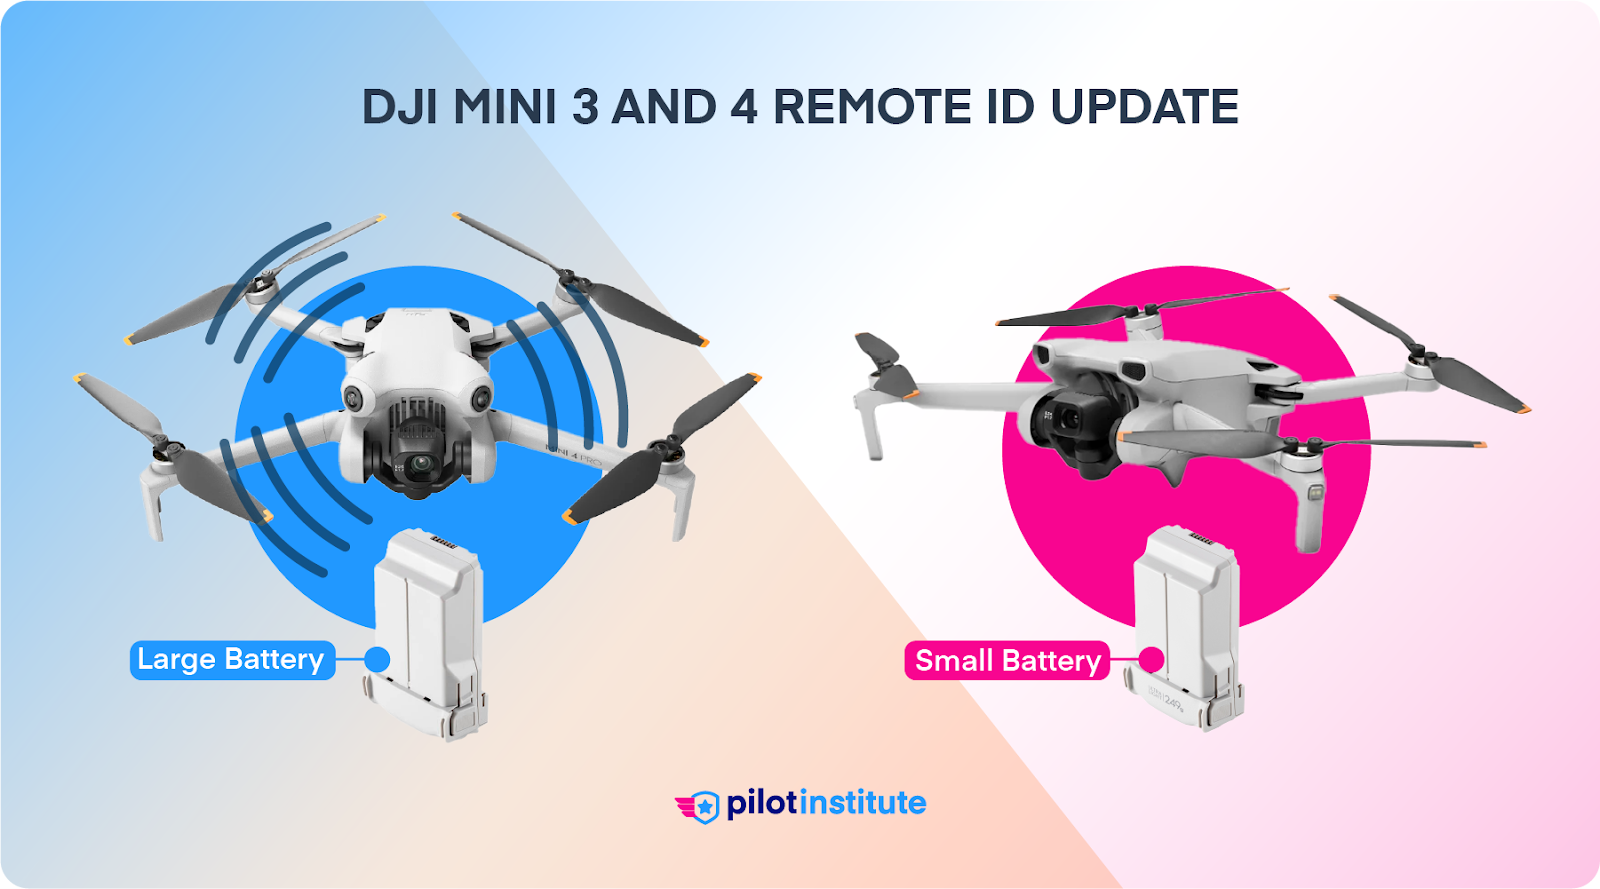 DJI Mini 3 and 4 models with large and small batteries.